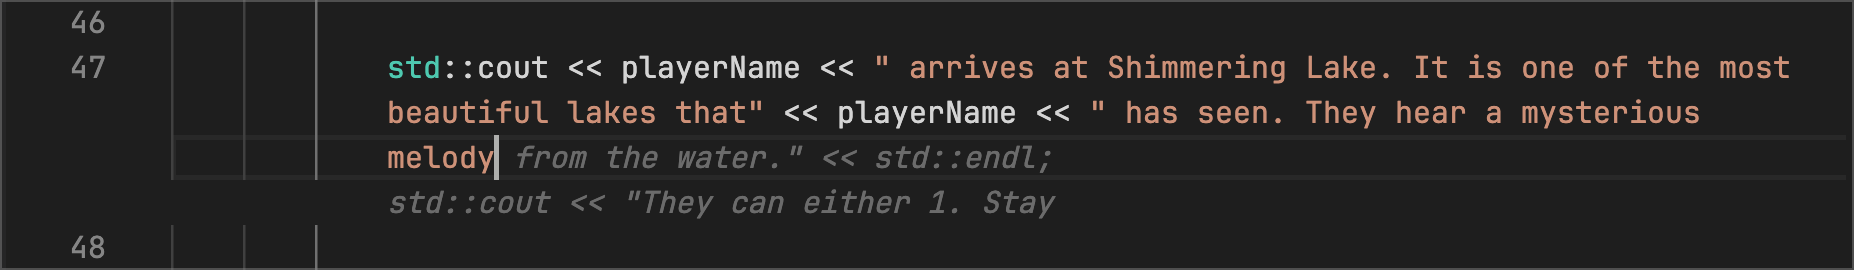 adventure.cpp - I added the playerName to the output and then prompted Code Suggestions to continue the narrative based on the comments above